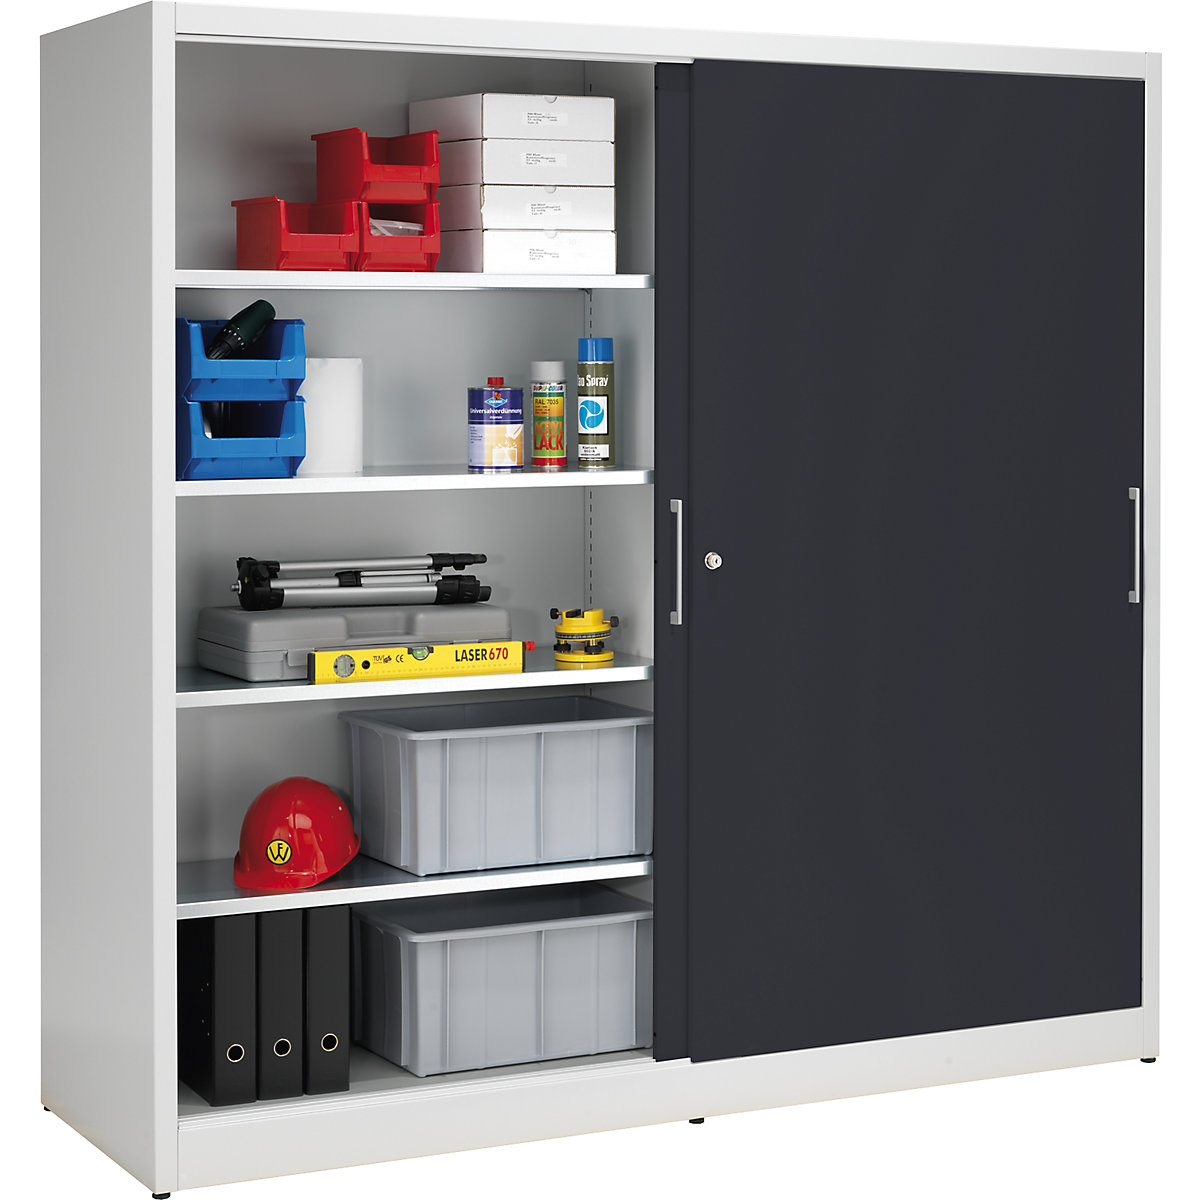 Sliding door cupboard, height 1950 mm – eurokraft pro, with centre partition and 2 x 4 shelves, width 2000 mm, depth 600 mm, doors charcoal RAL 7016-3